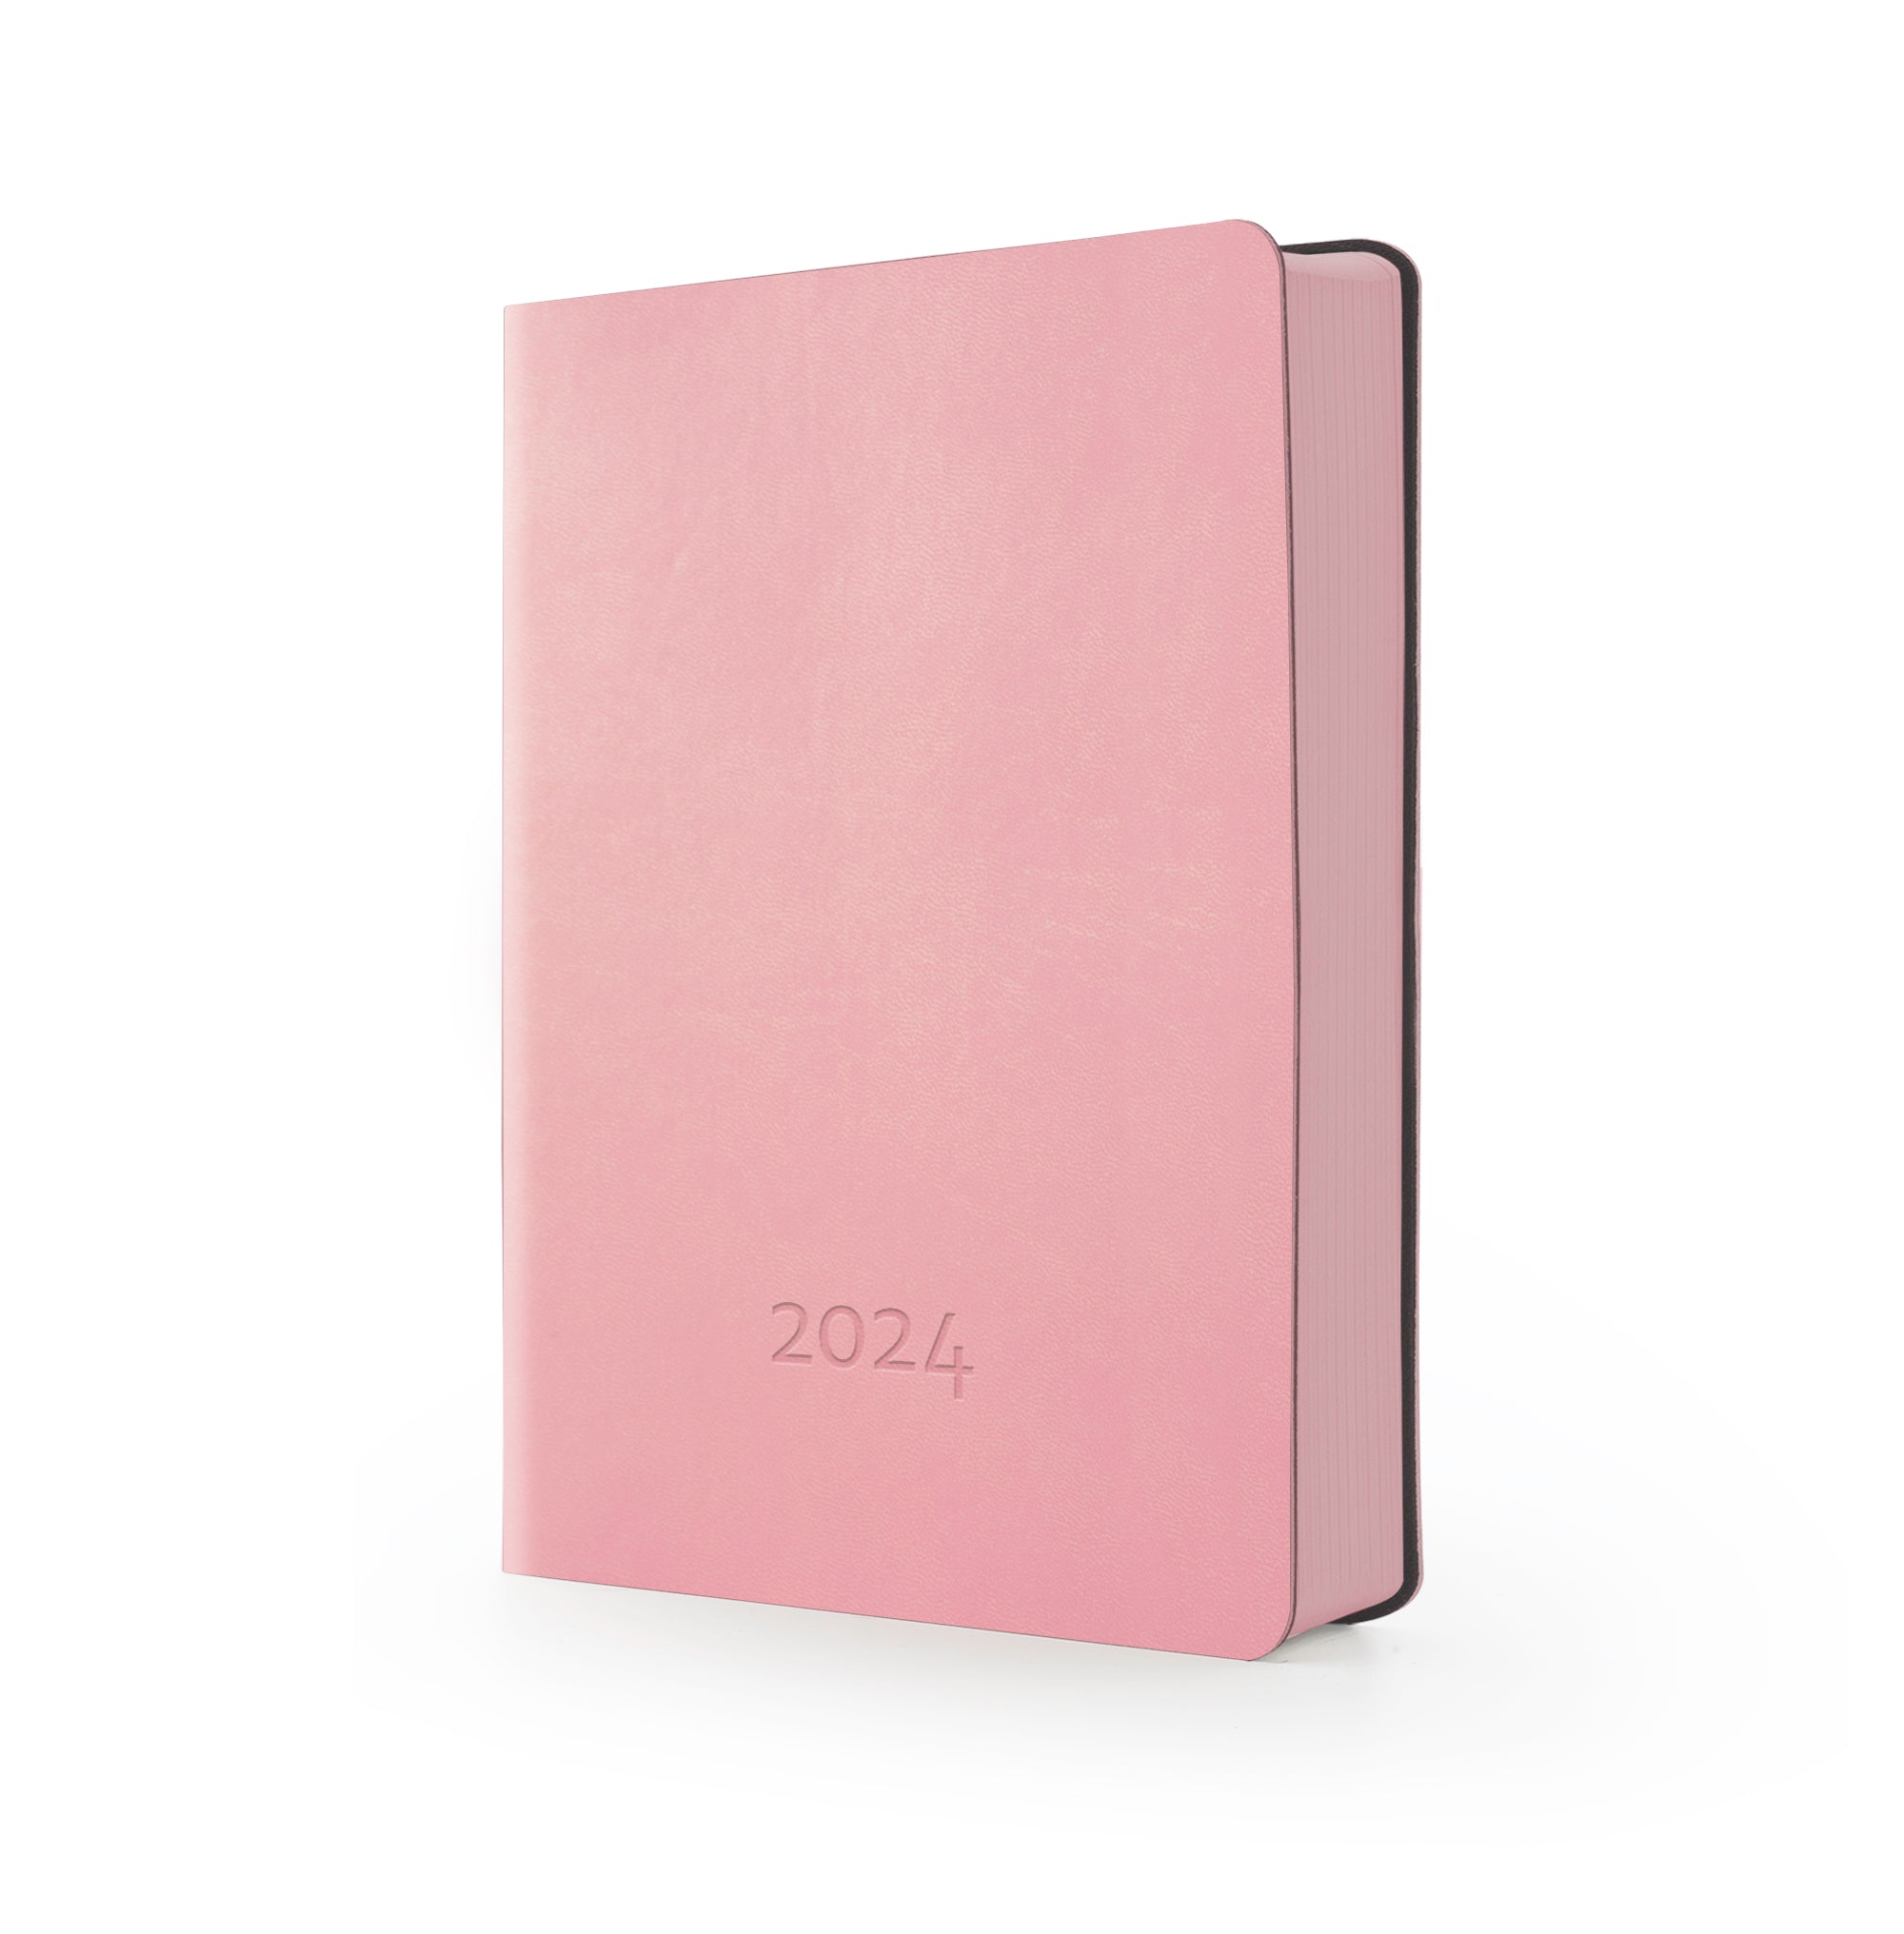 Image shows a Flexi Pink MOM/WOW diary